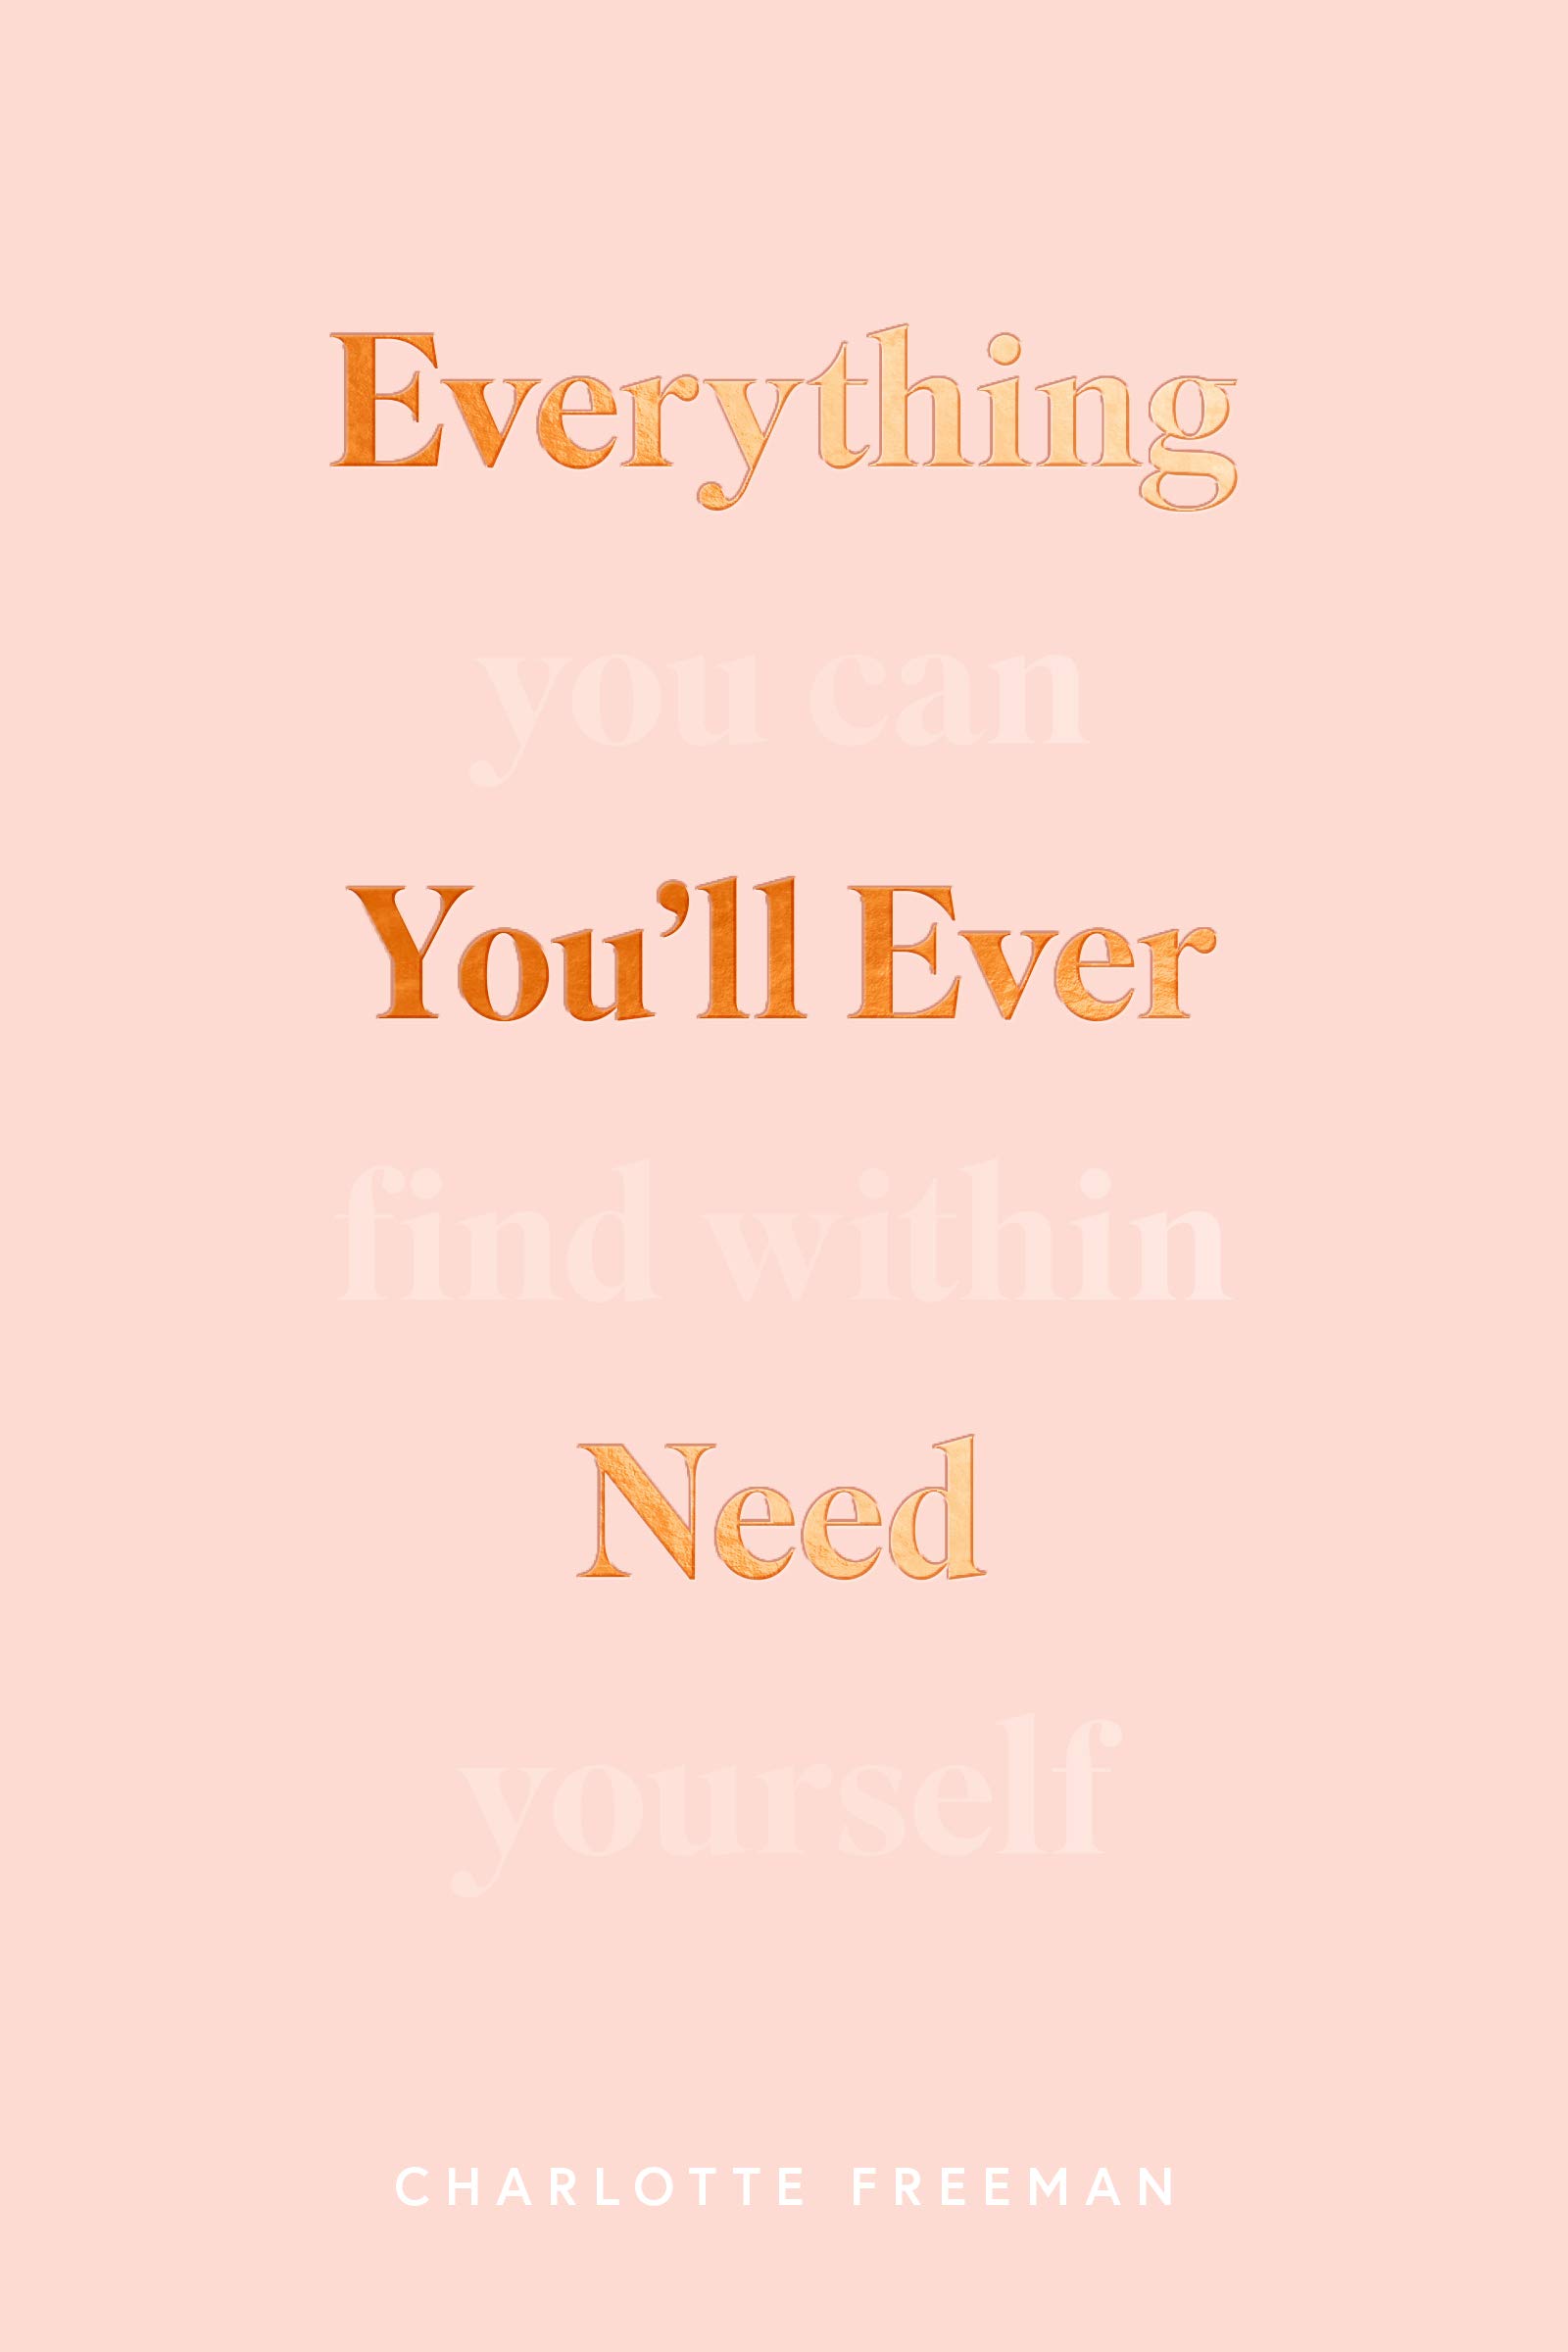 Everything You’ll Ever Need (You Can Find Within Yourself)